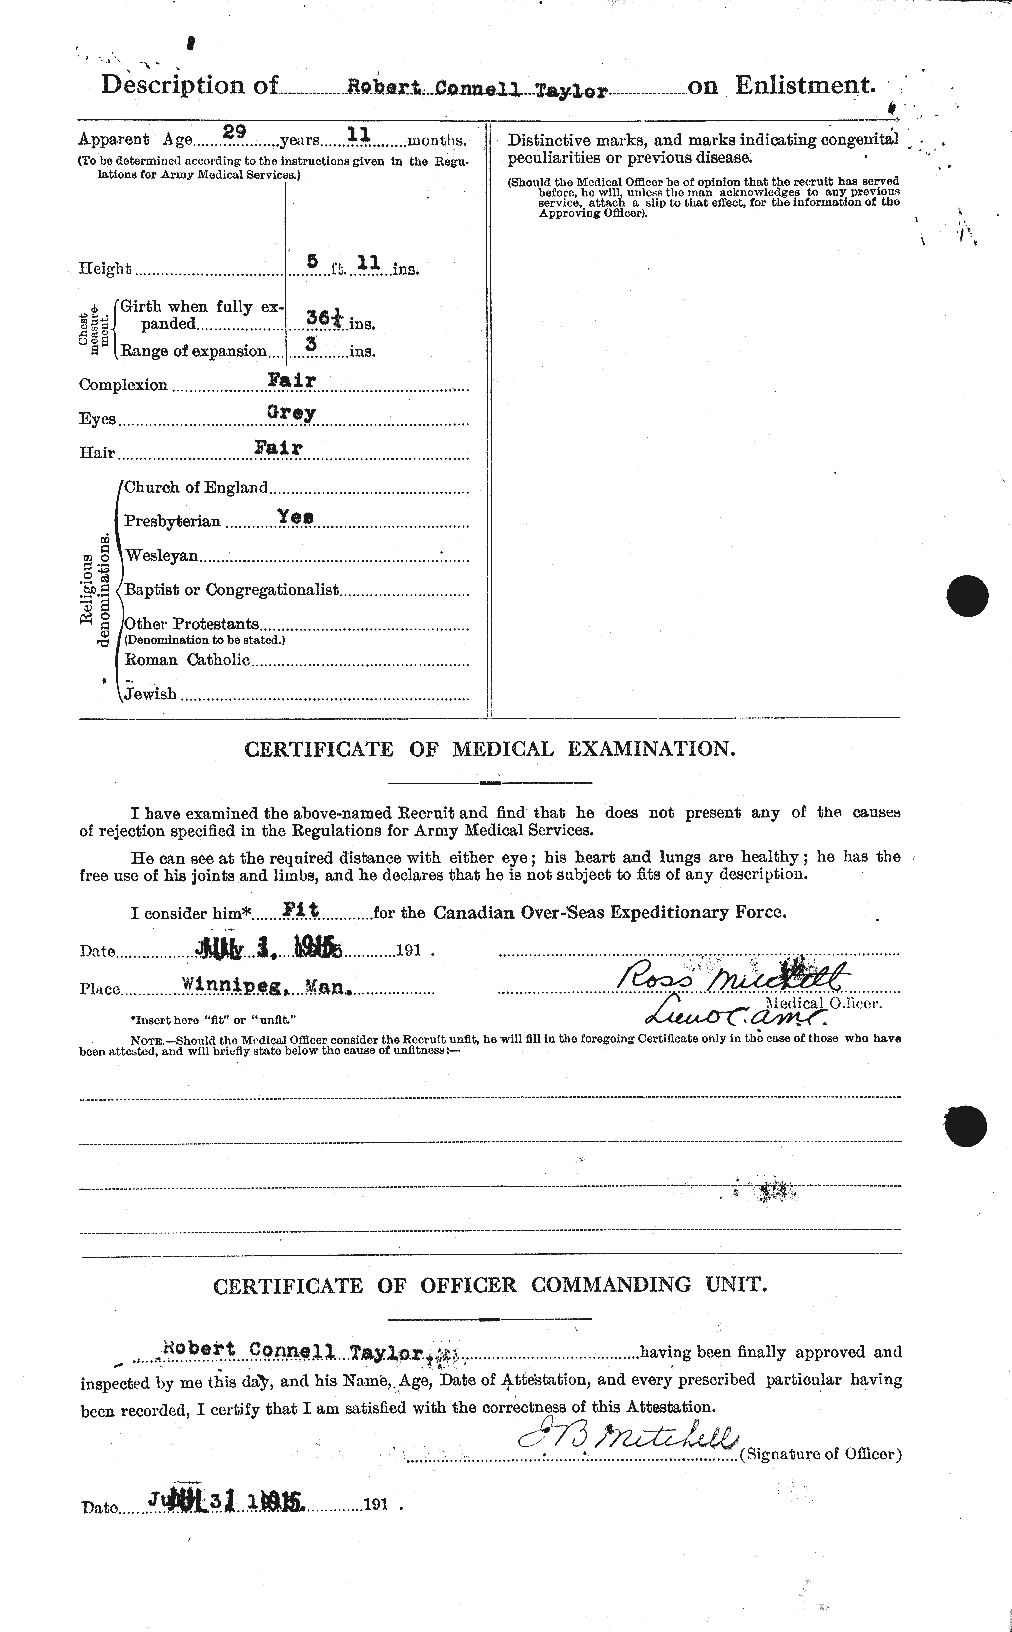 Personnel Records of the First World War - CEF 627467b